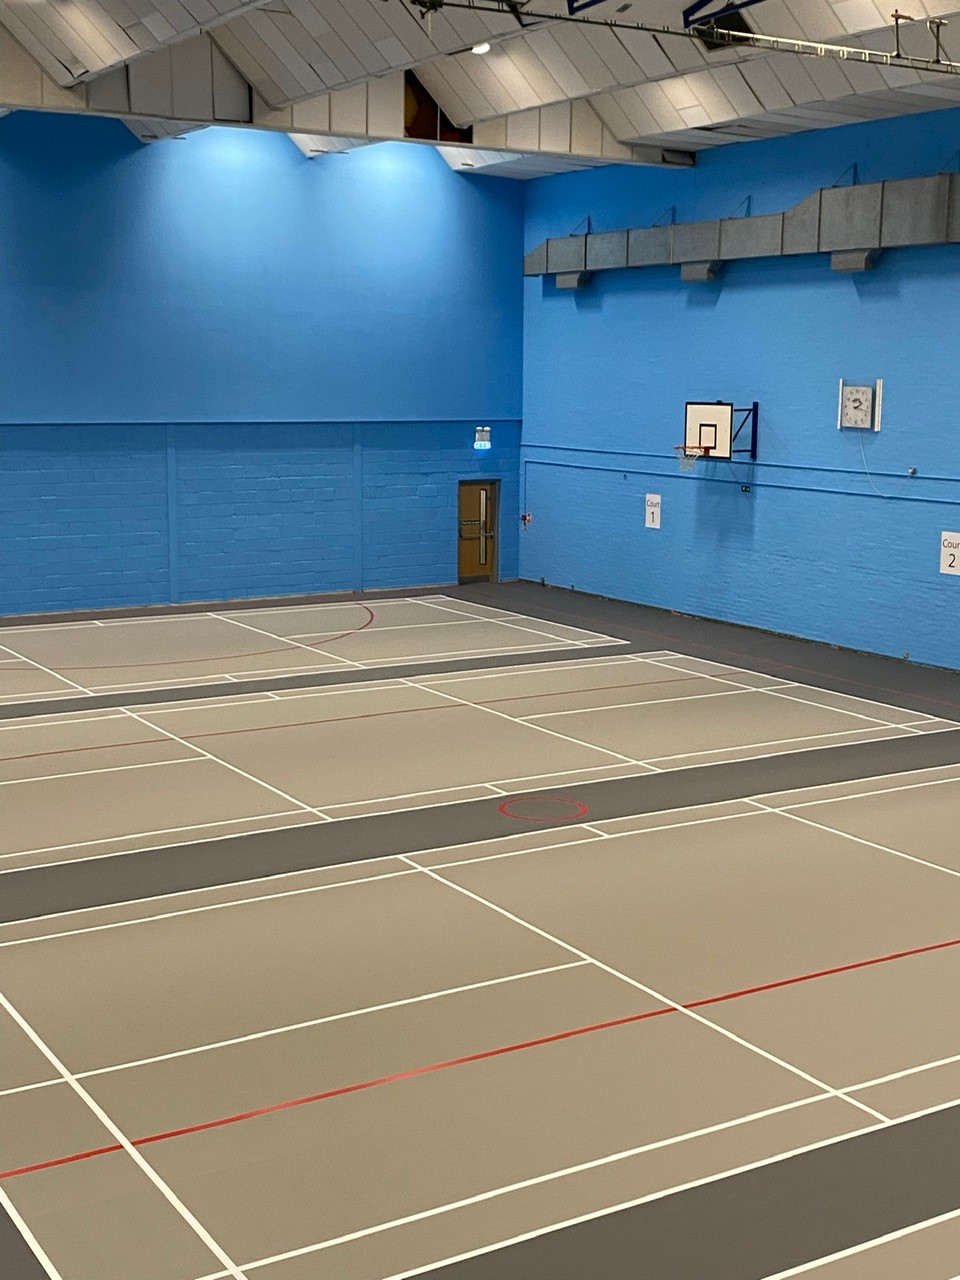 New seamless multiuse point-elastic floor for Meadway Leisure Centre